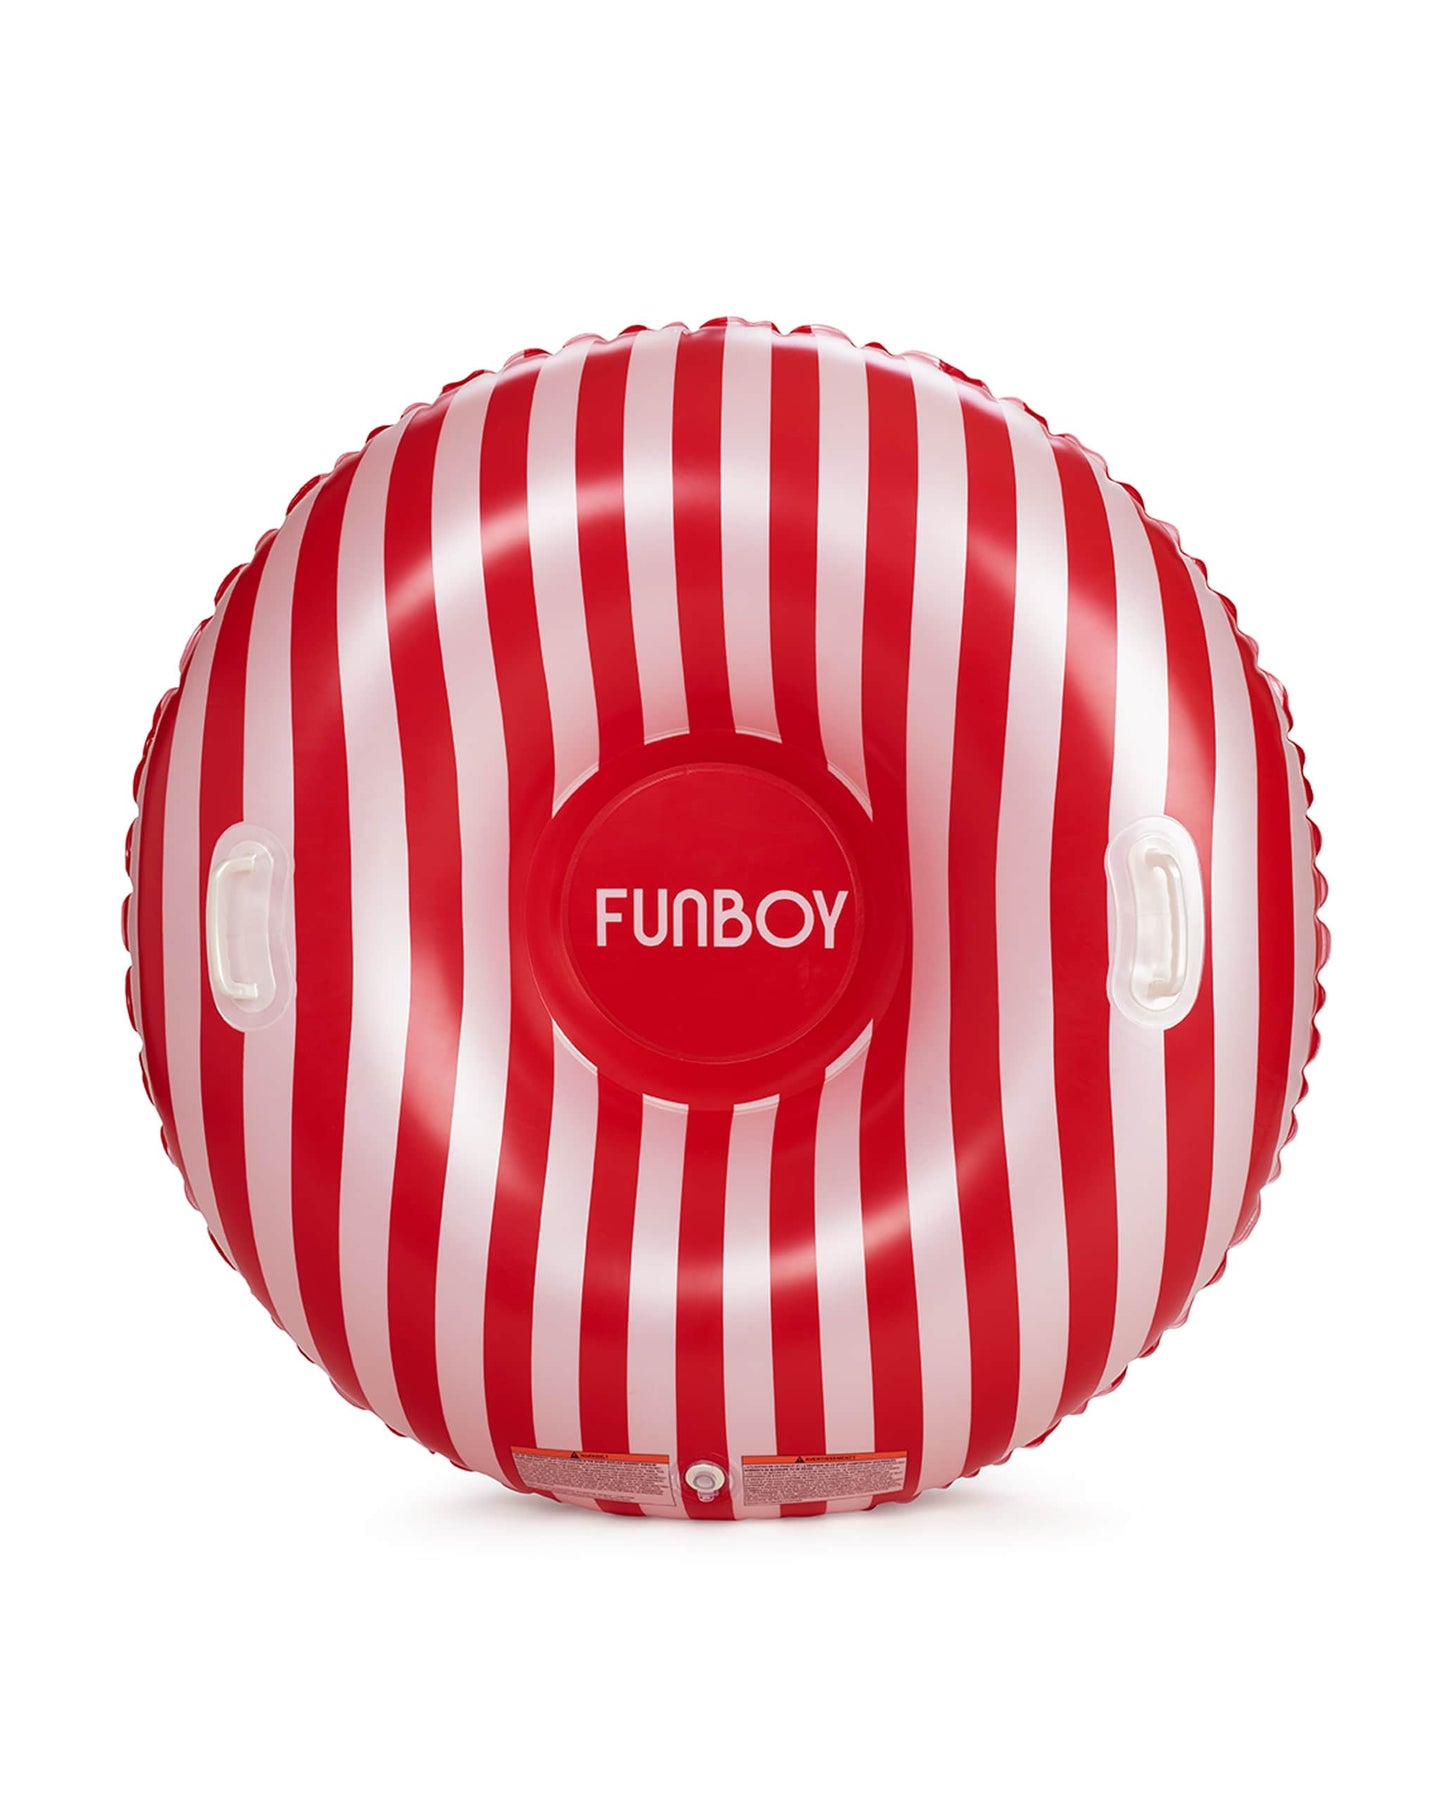 Snow Tube Sled - Red Candy Striped